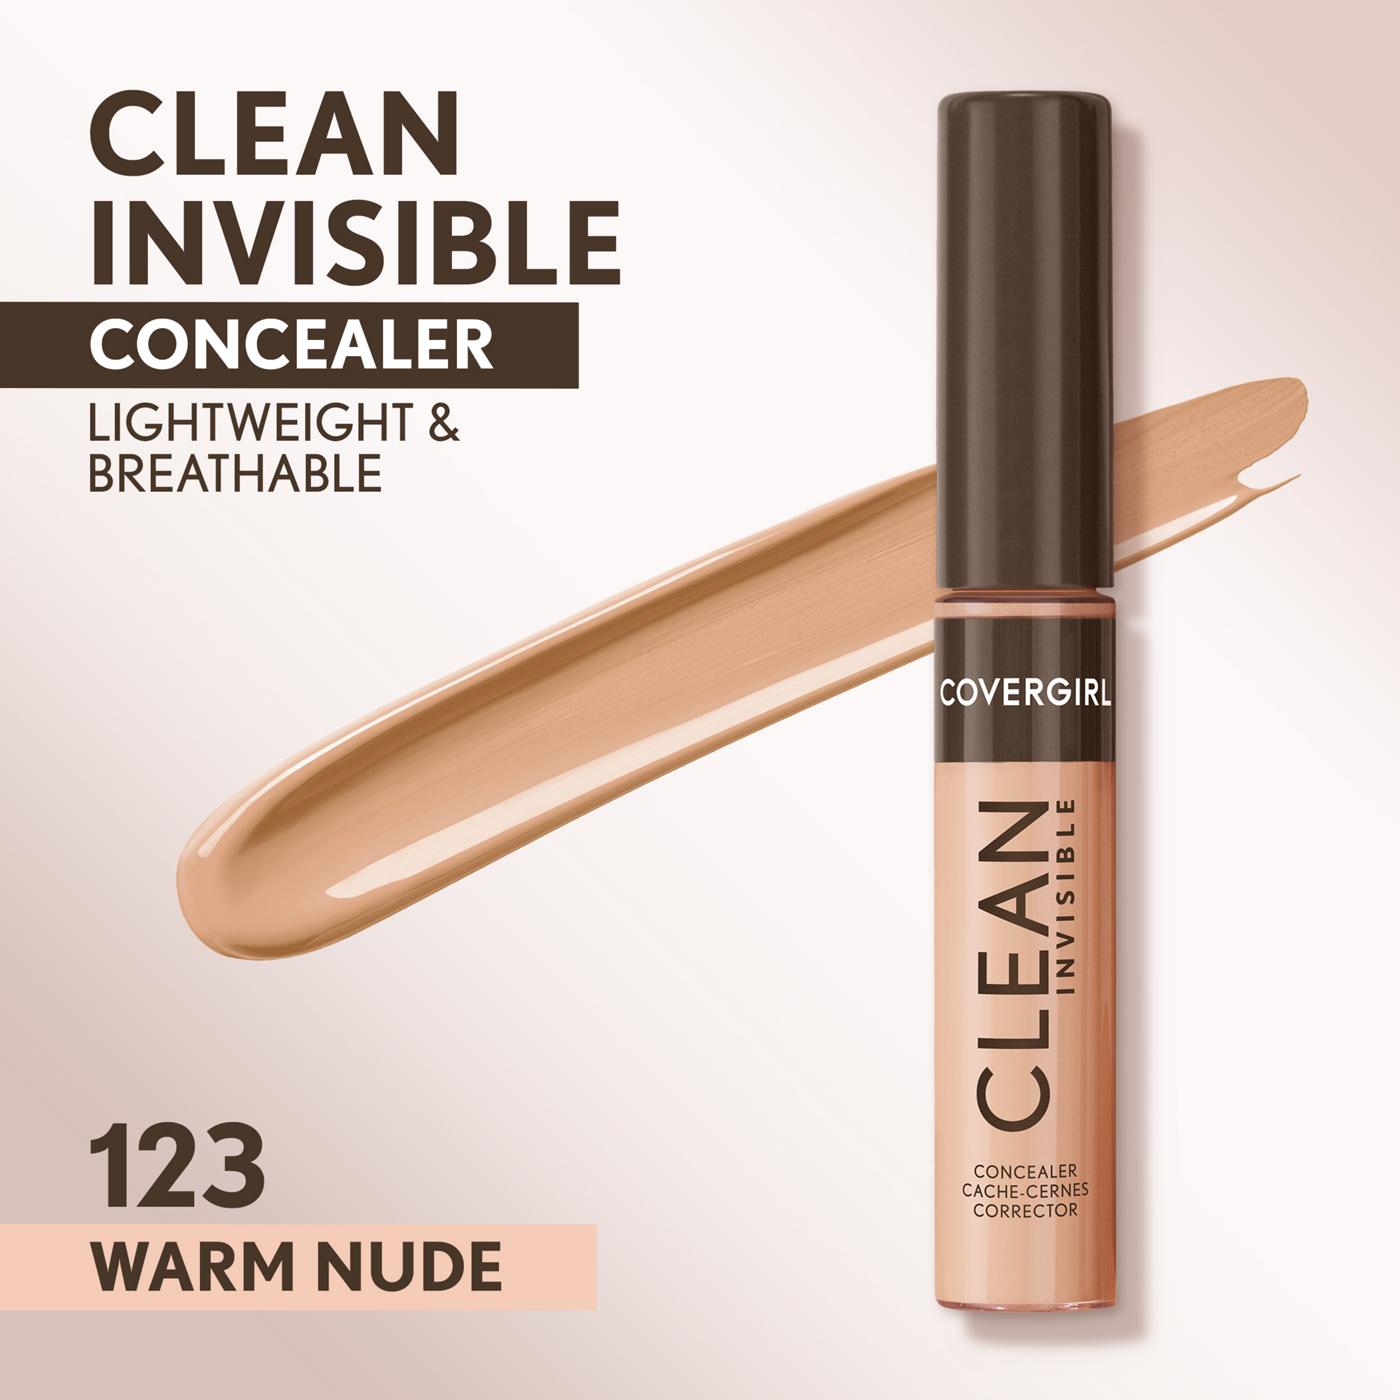 Covergirl Clean Invisible Concealer - Warm Nude; image 15 of 15